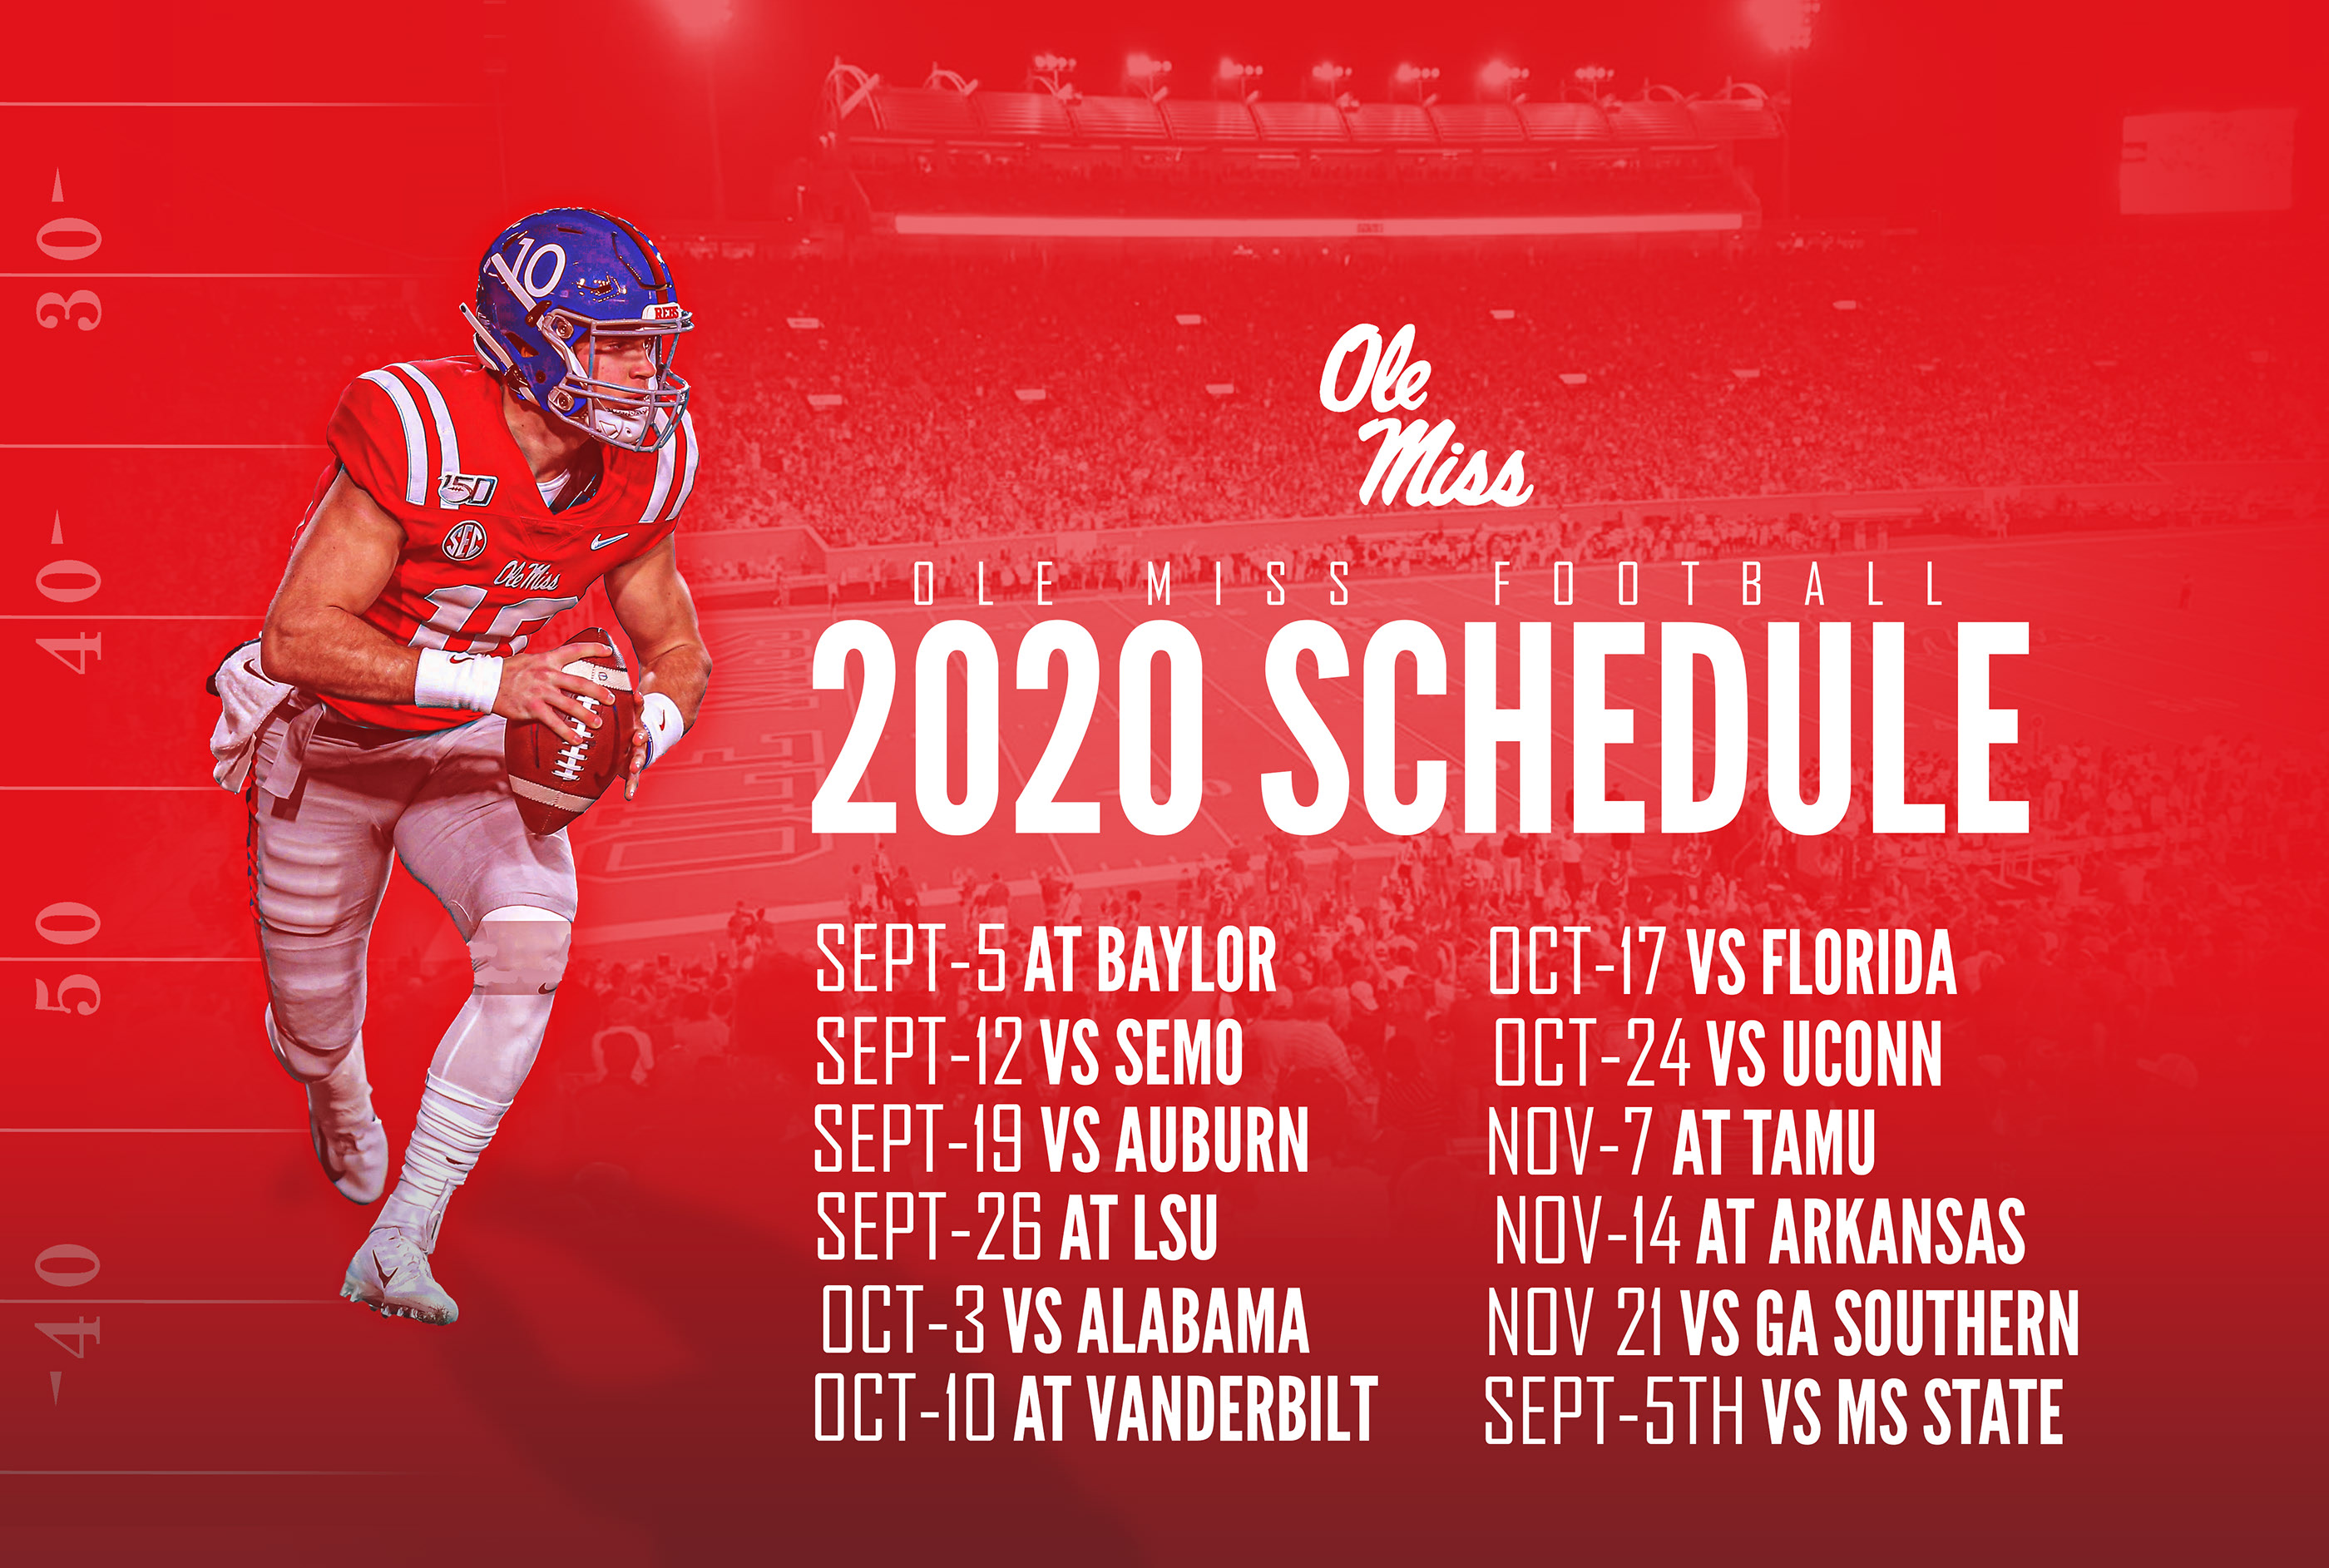 Ms State Football Schedule 2022 Ole Miss Football Schedule 2020 On Behance